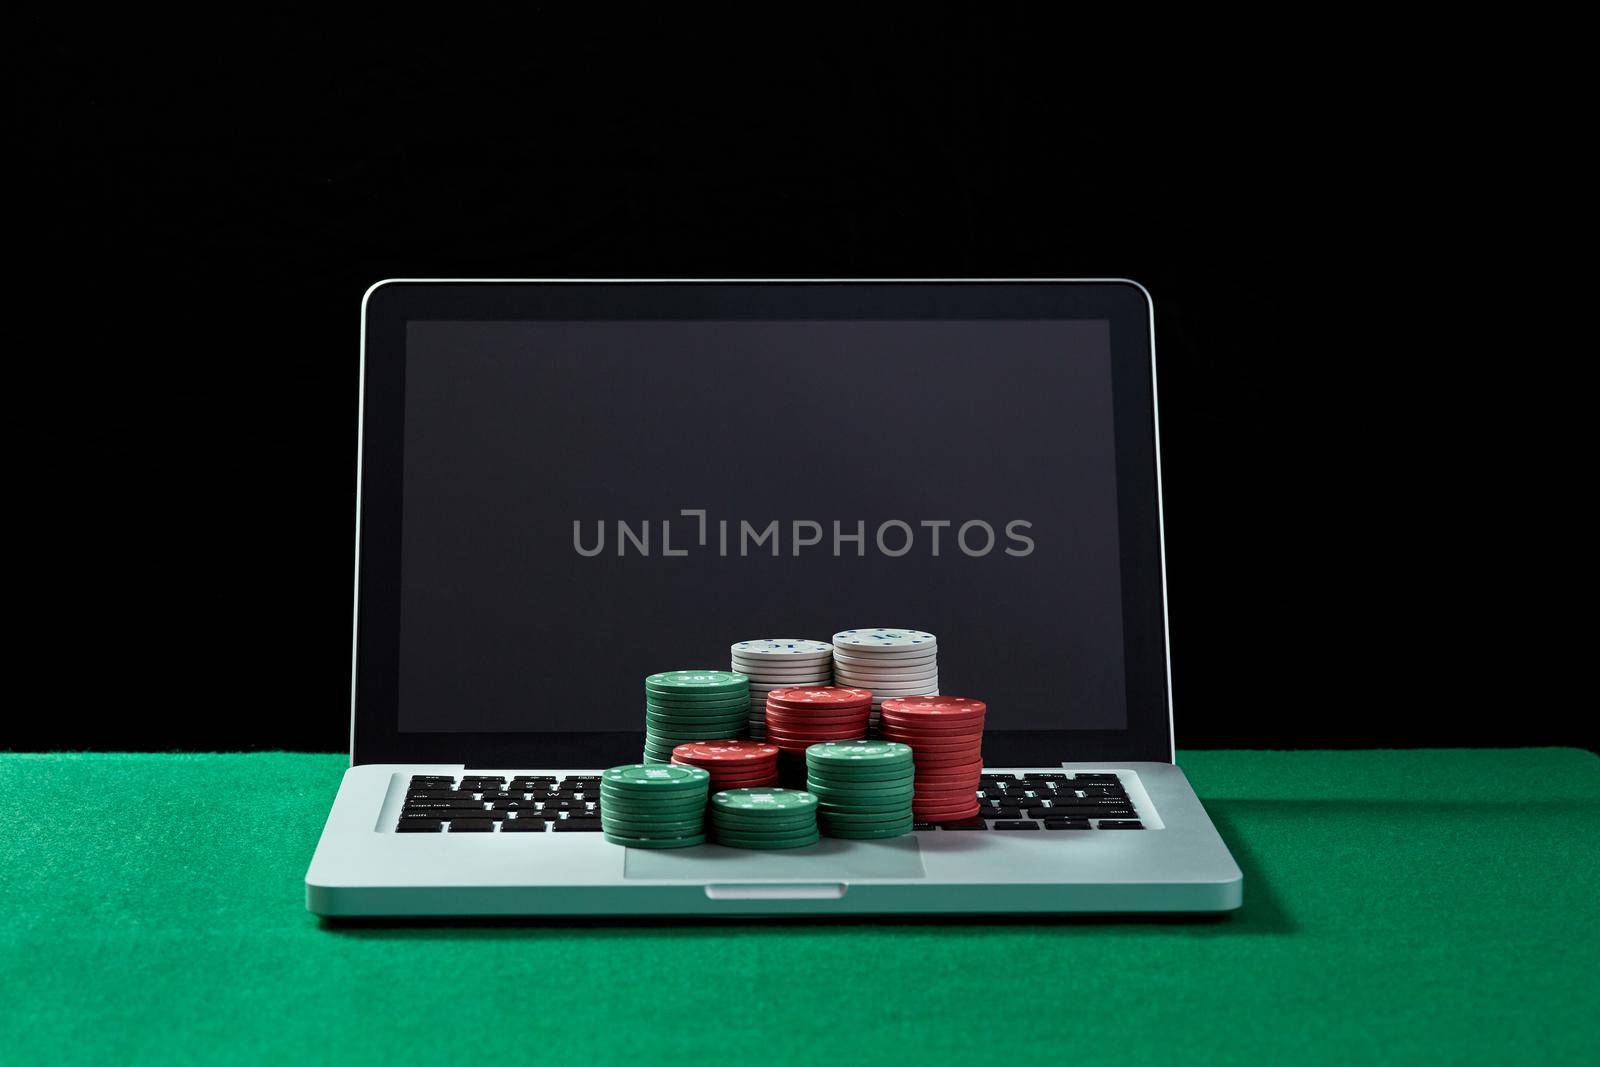 Image of casino chips on a keyboard notebook at green table. Concept for online gambling, poker, virtual casino.